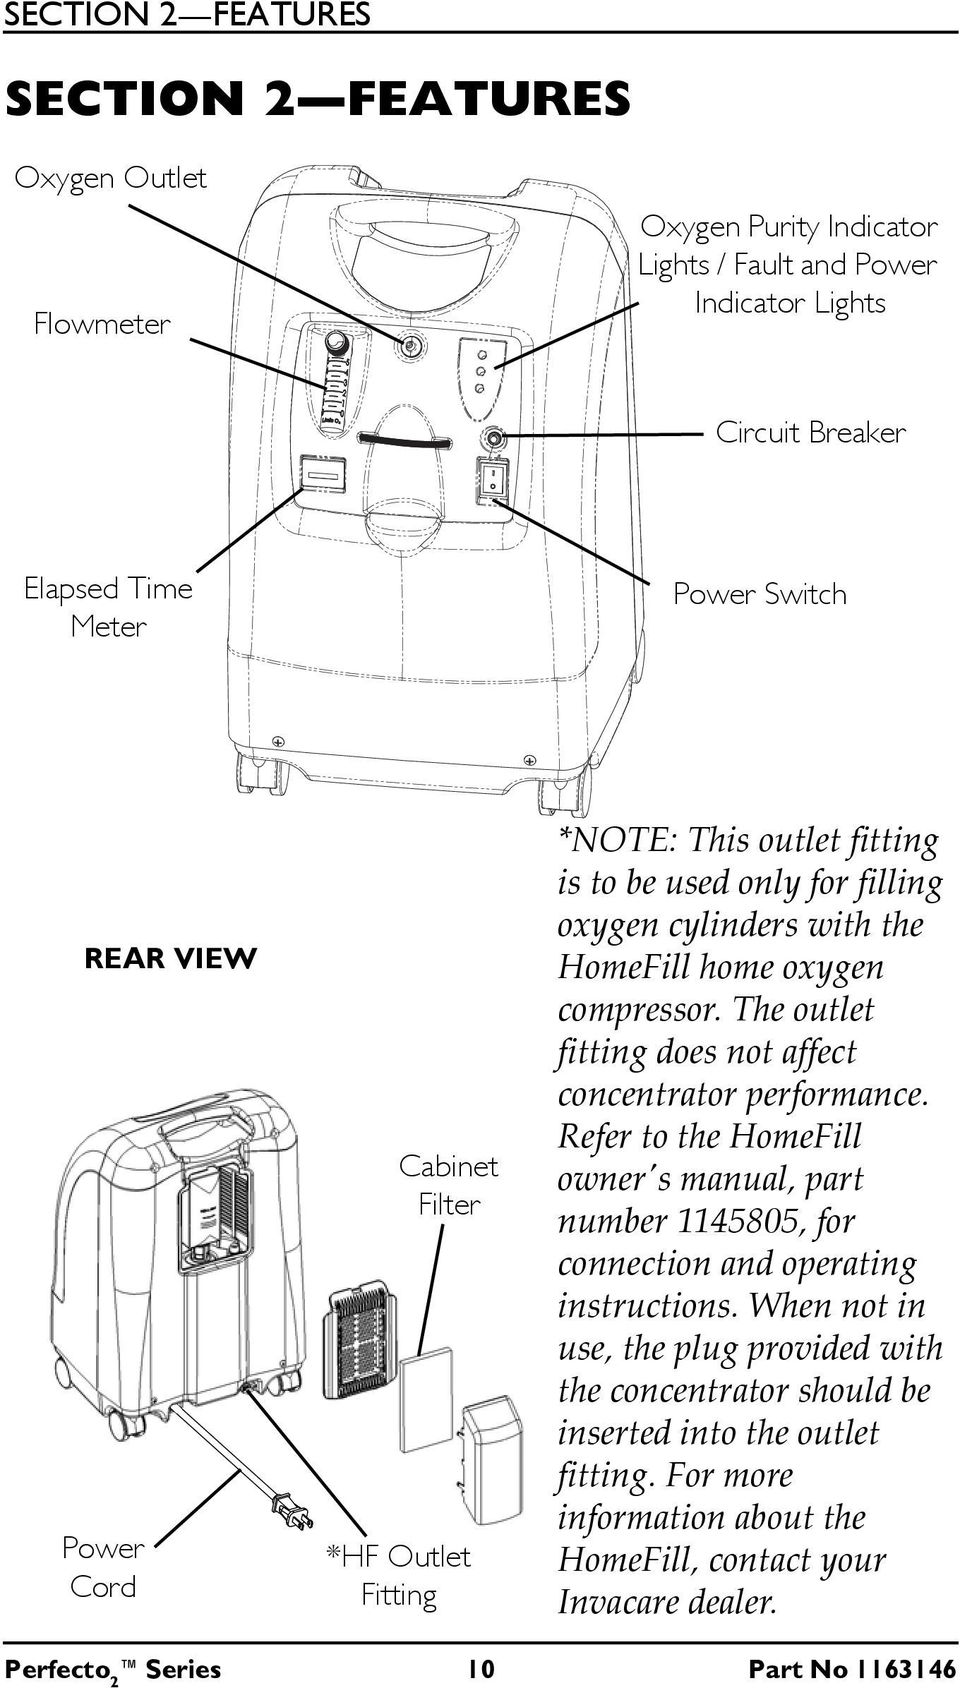 The outlet fitting does not affect concentrator performance. Refer to the HomeFill owner's manual, part number 1145805, for connection and operating instructions.